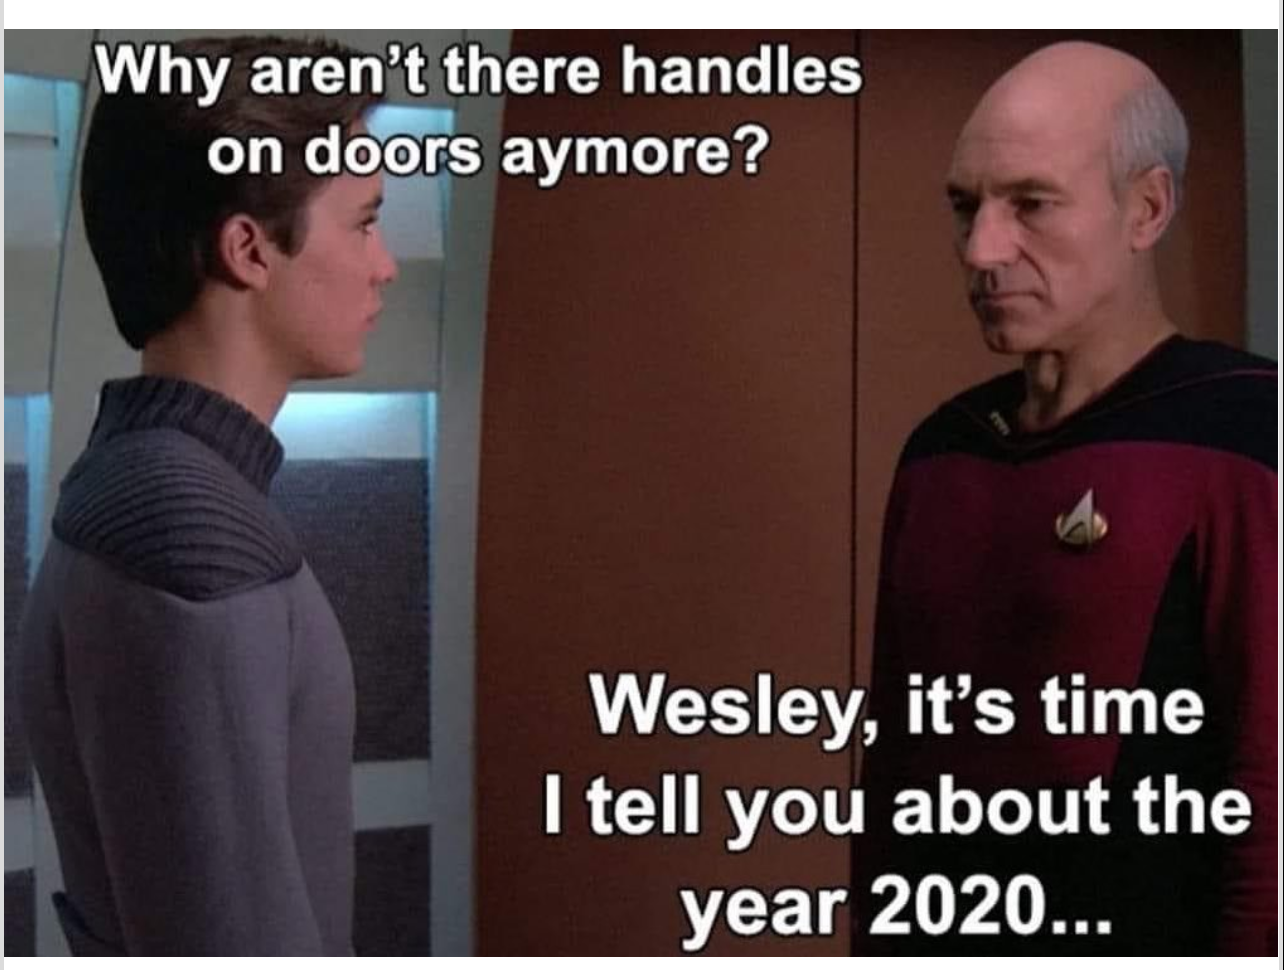 coronavirus memes - Why aren't there handles on doors aymore? Wesley, it's time I tell you about the year 2020...